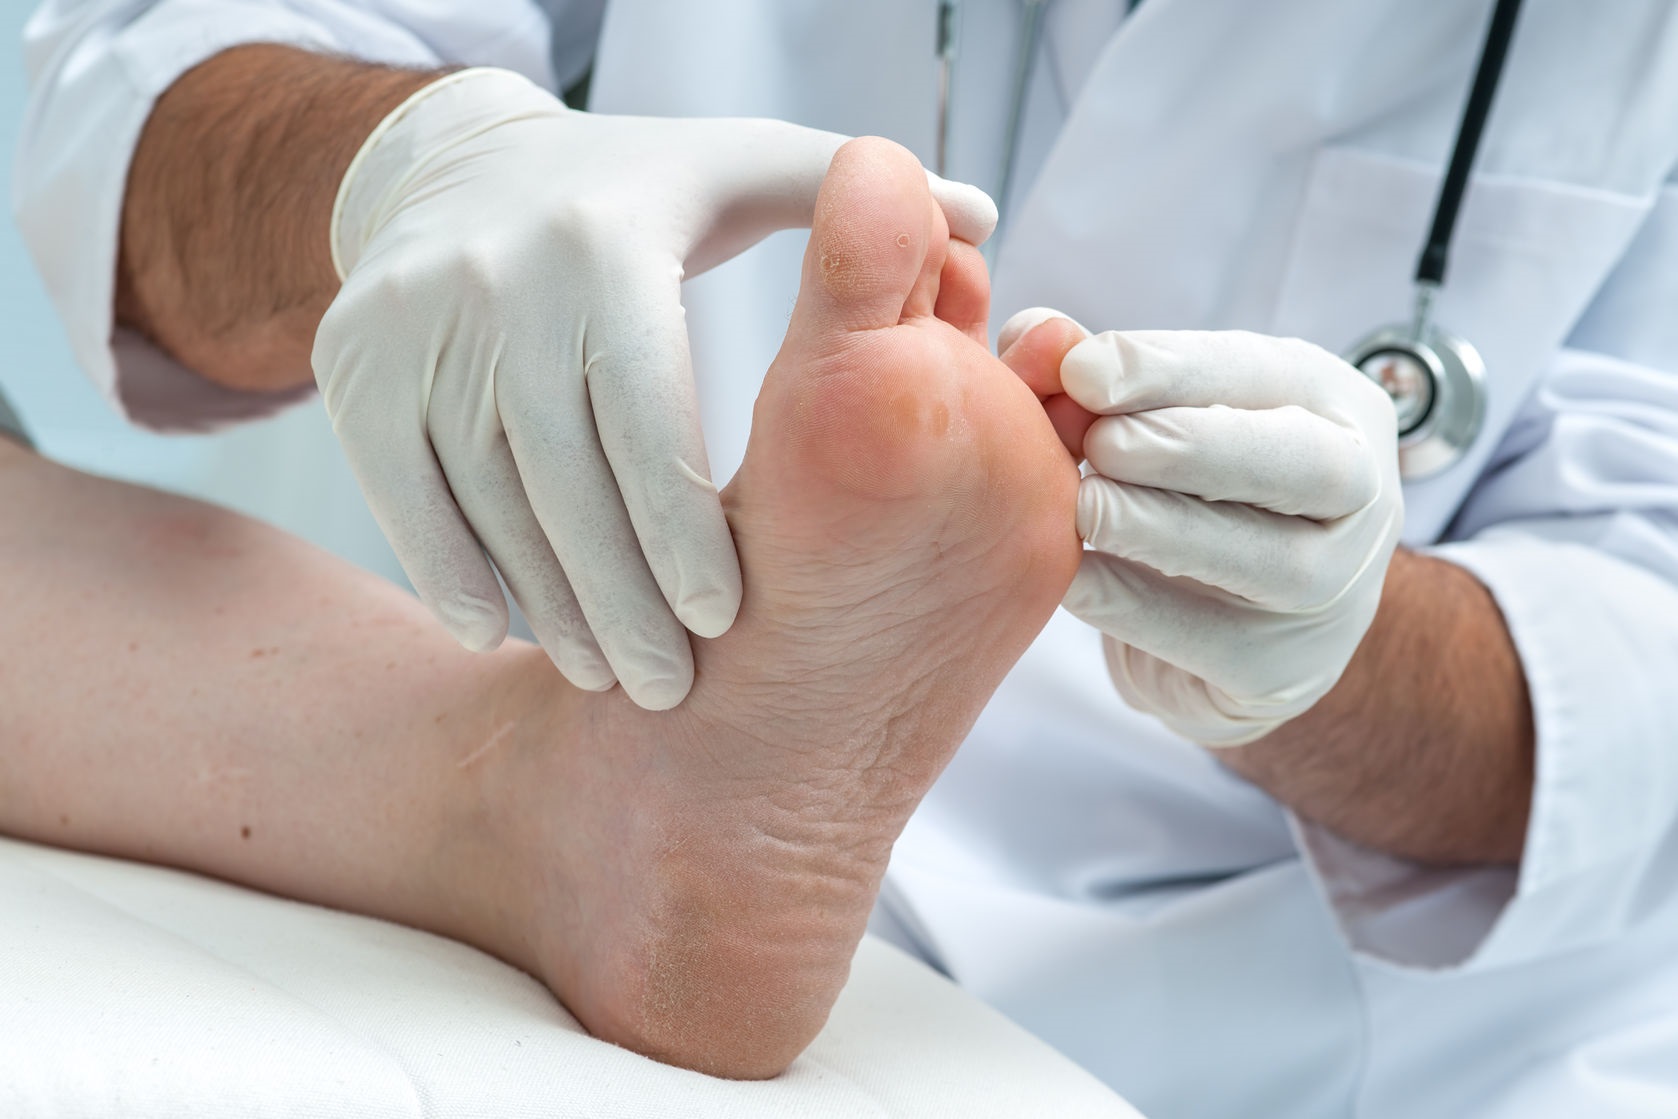 Diabetes: How to Examine Your Feet | Podiatry Center of New Jersey